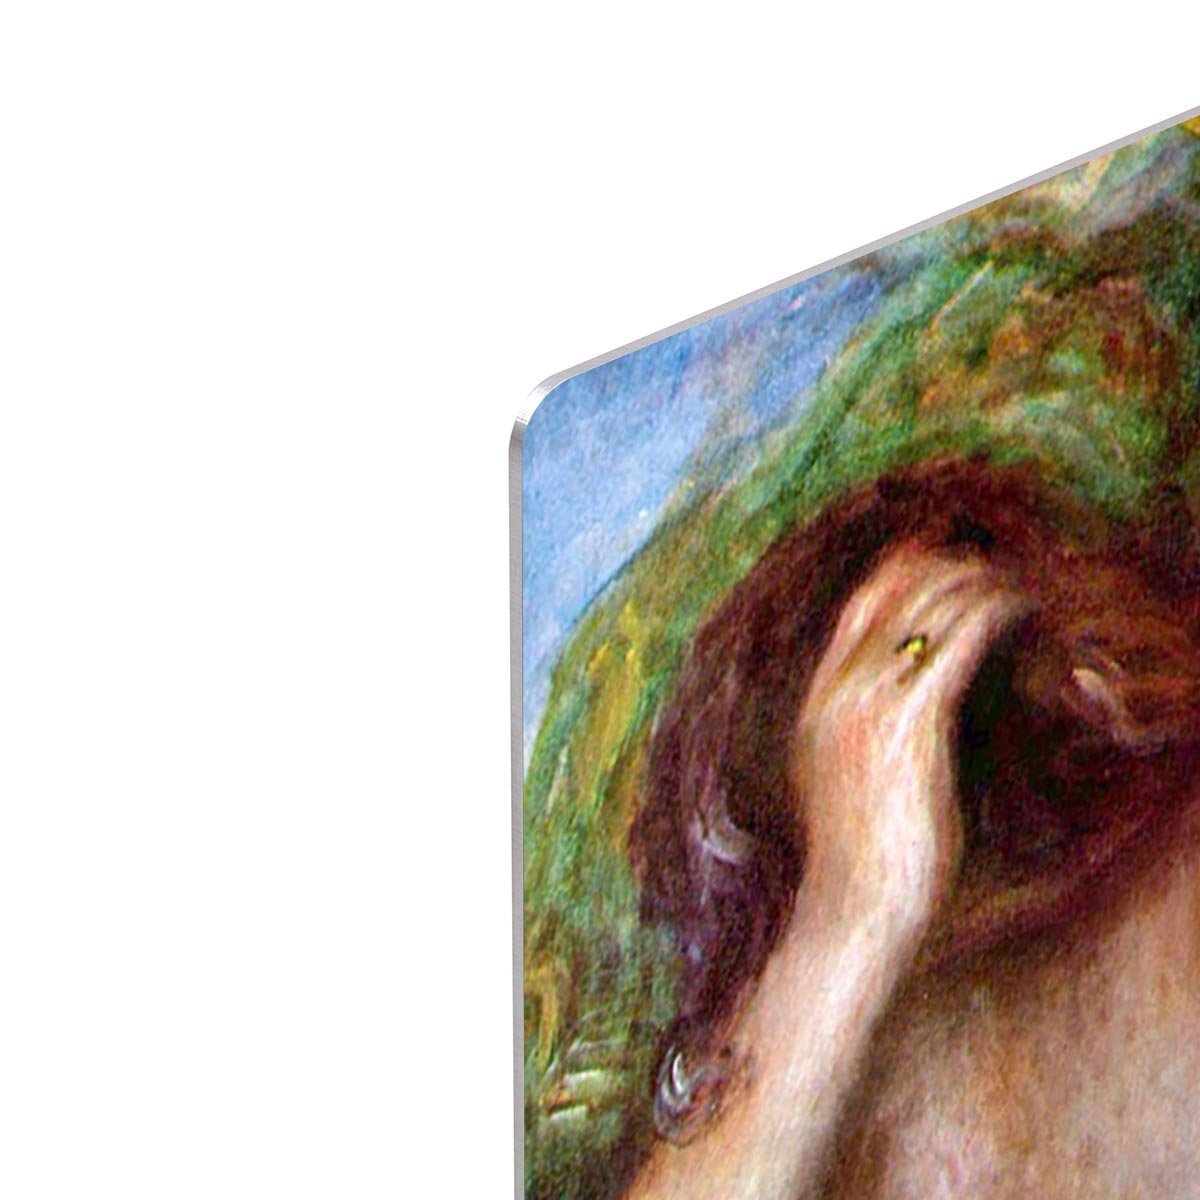 Woman at the Well by Renoir HD Metal Print